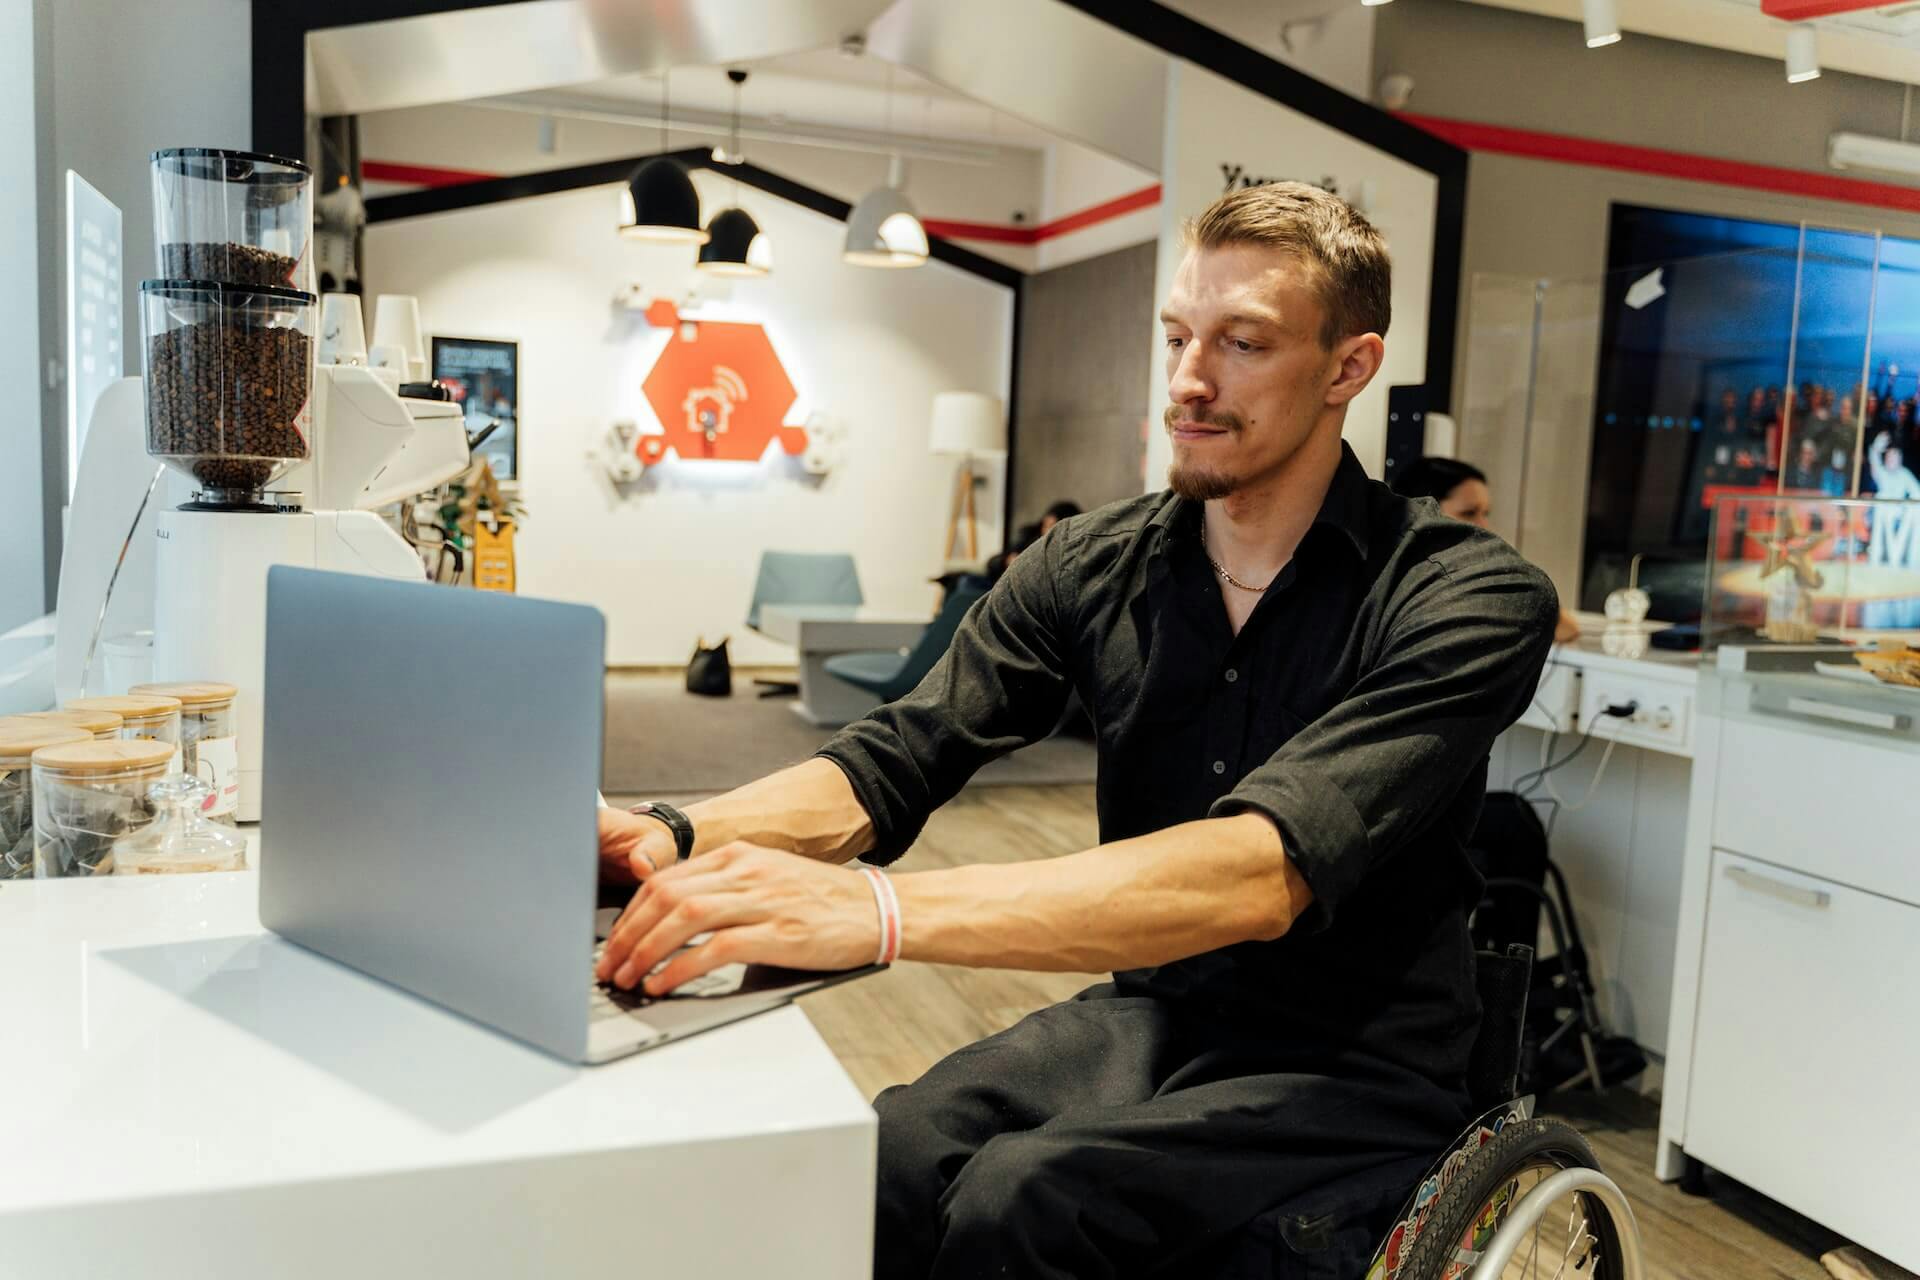 Worker with wheelchair at the office